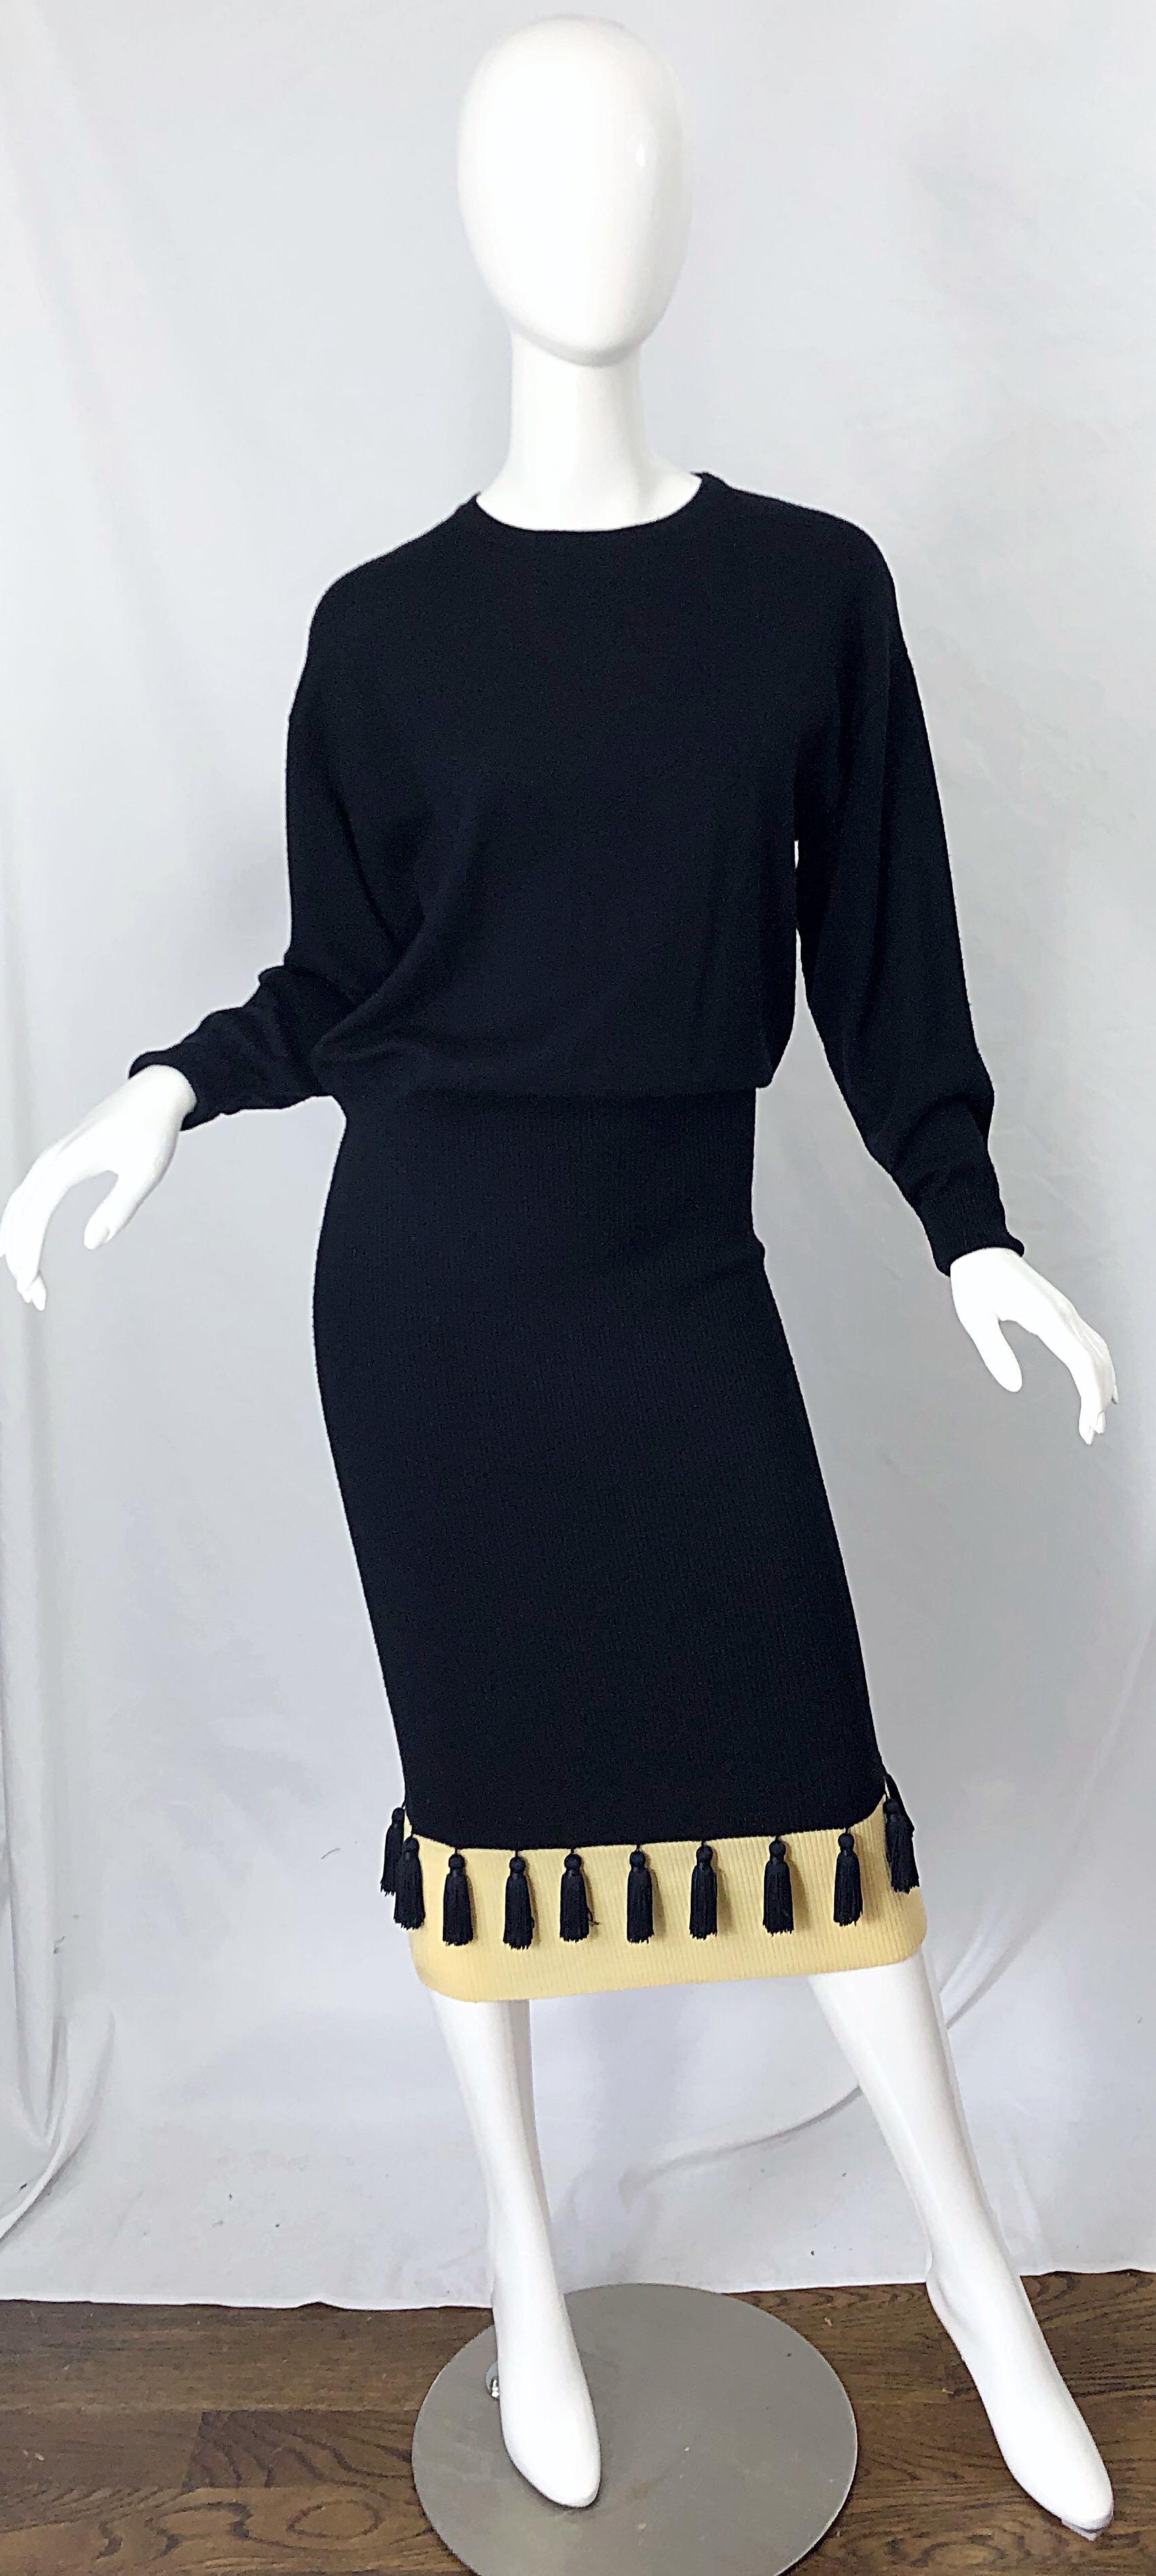 1980s Angelo Tarlazzi Black and Ivory Wool Dolman Sleeve 80s Sweater Dress For Sale 8